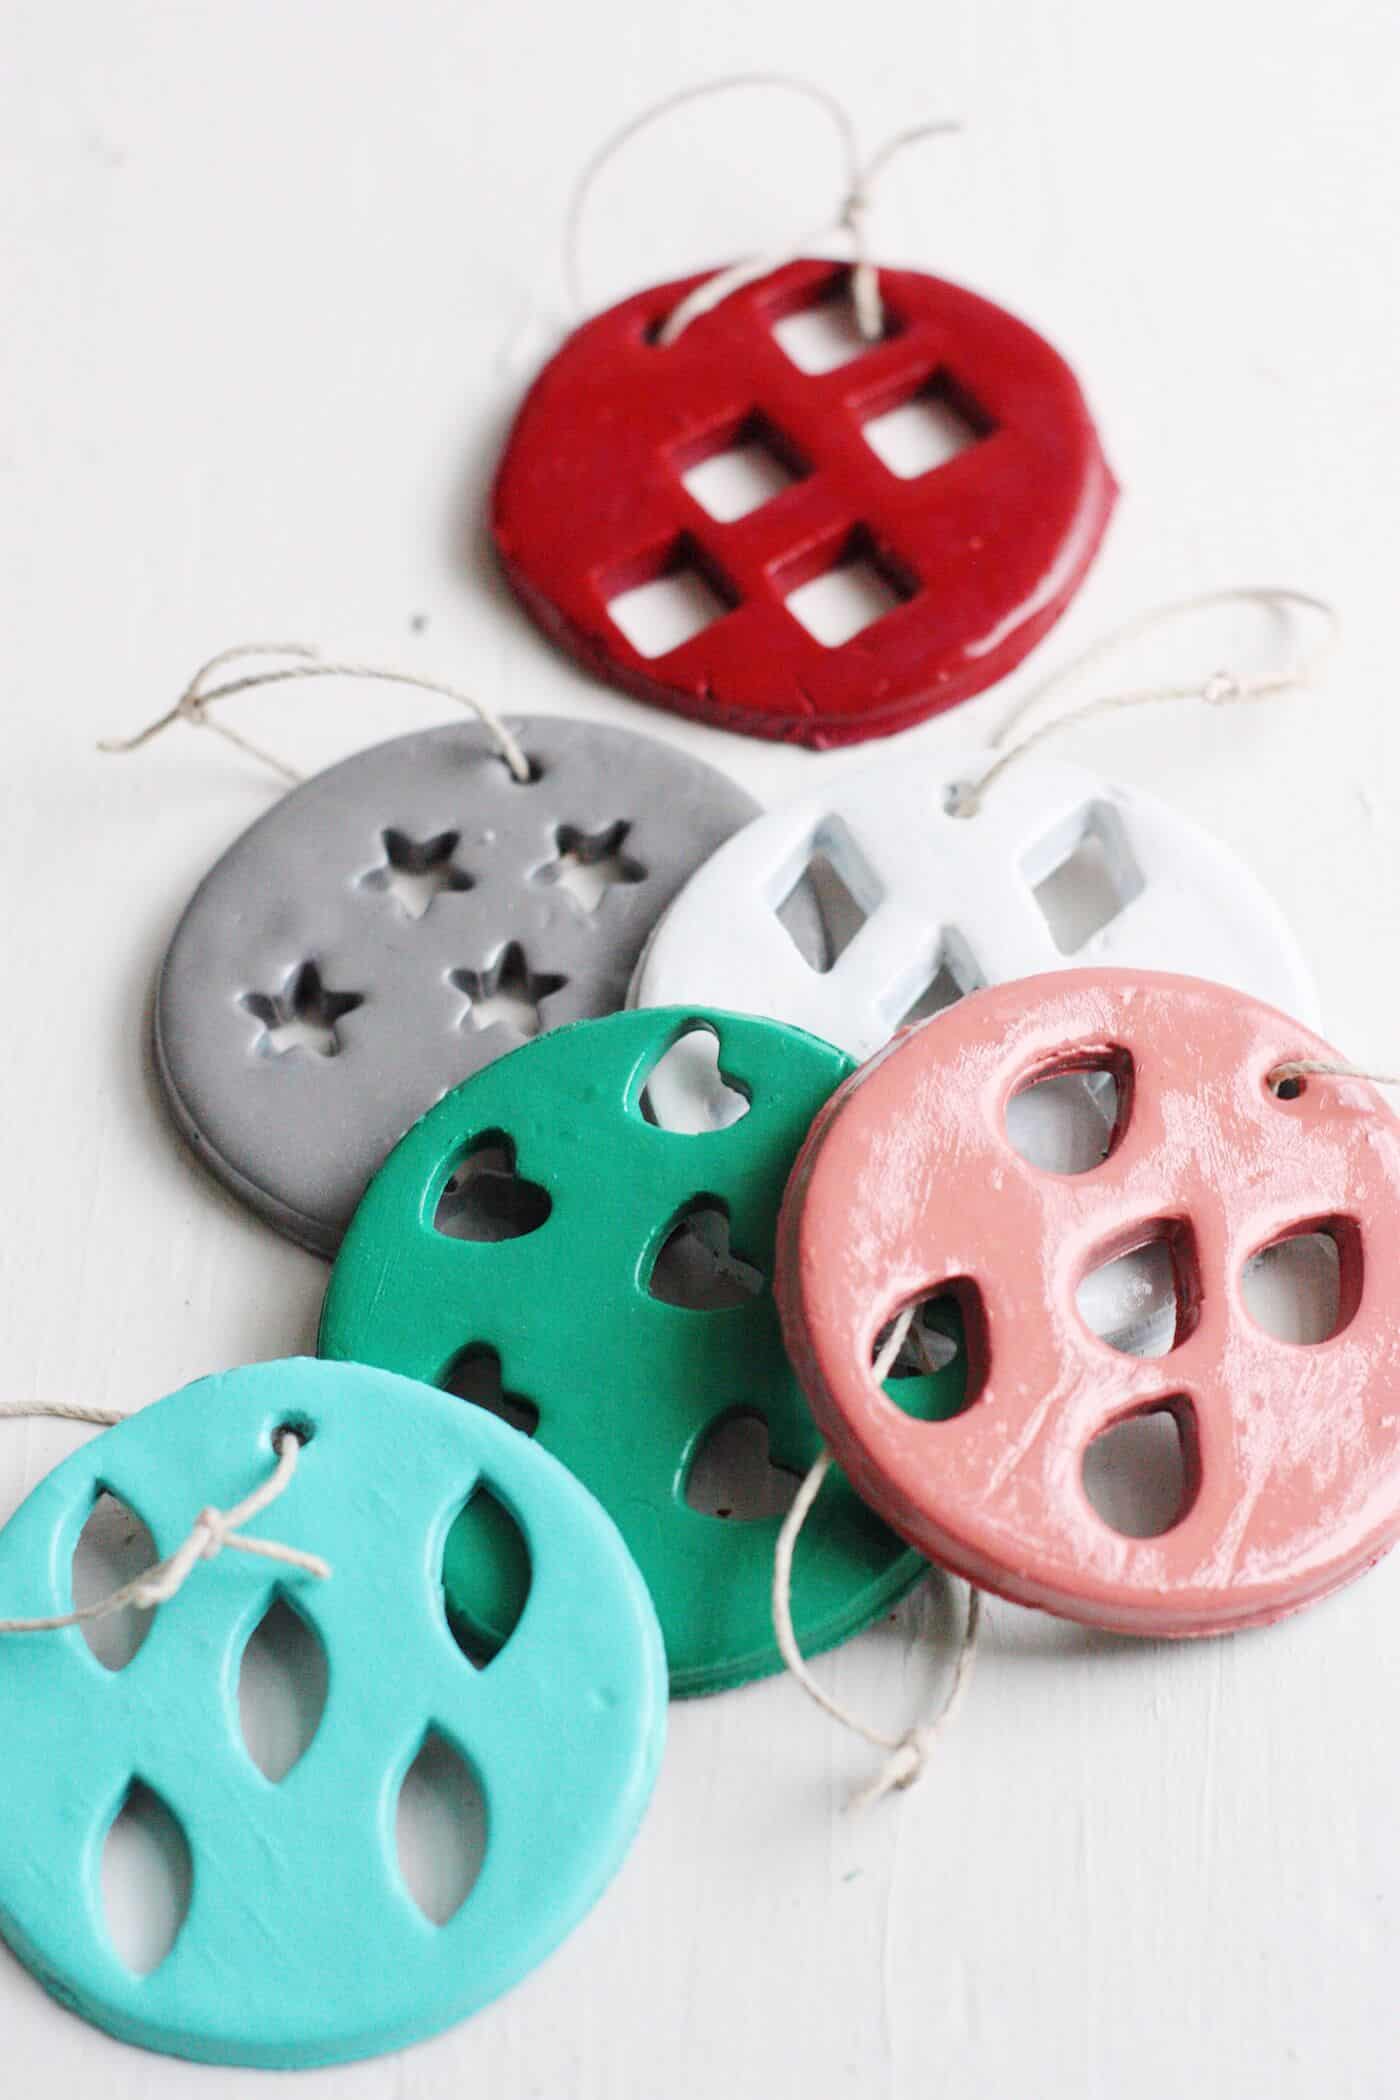 These clay Christmas ornaments are kid friendly but still look great on your tree! They are so easy to make; use your favorite paint colors.